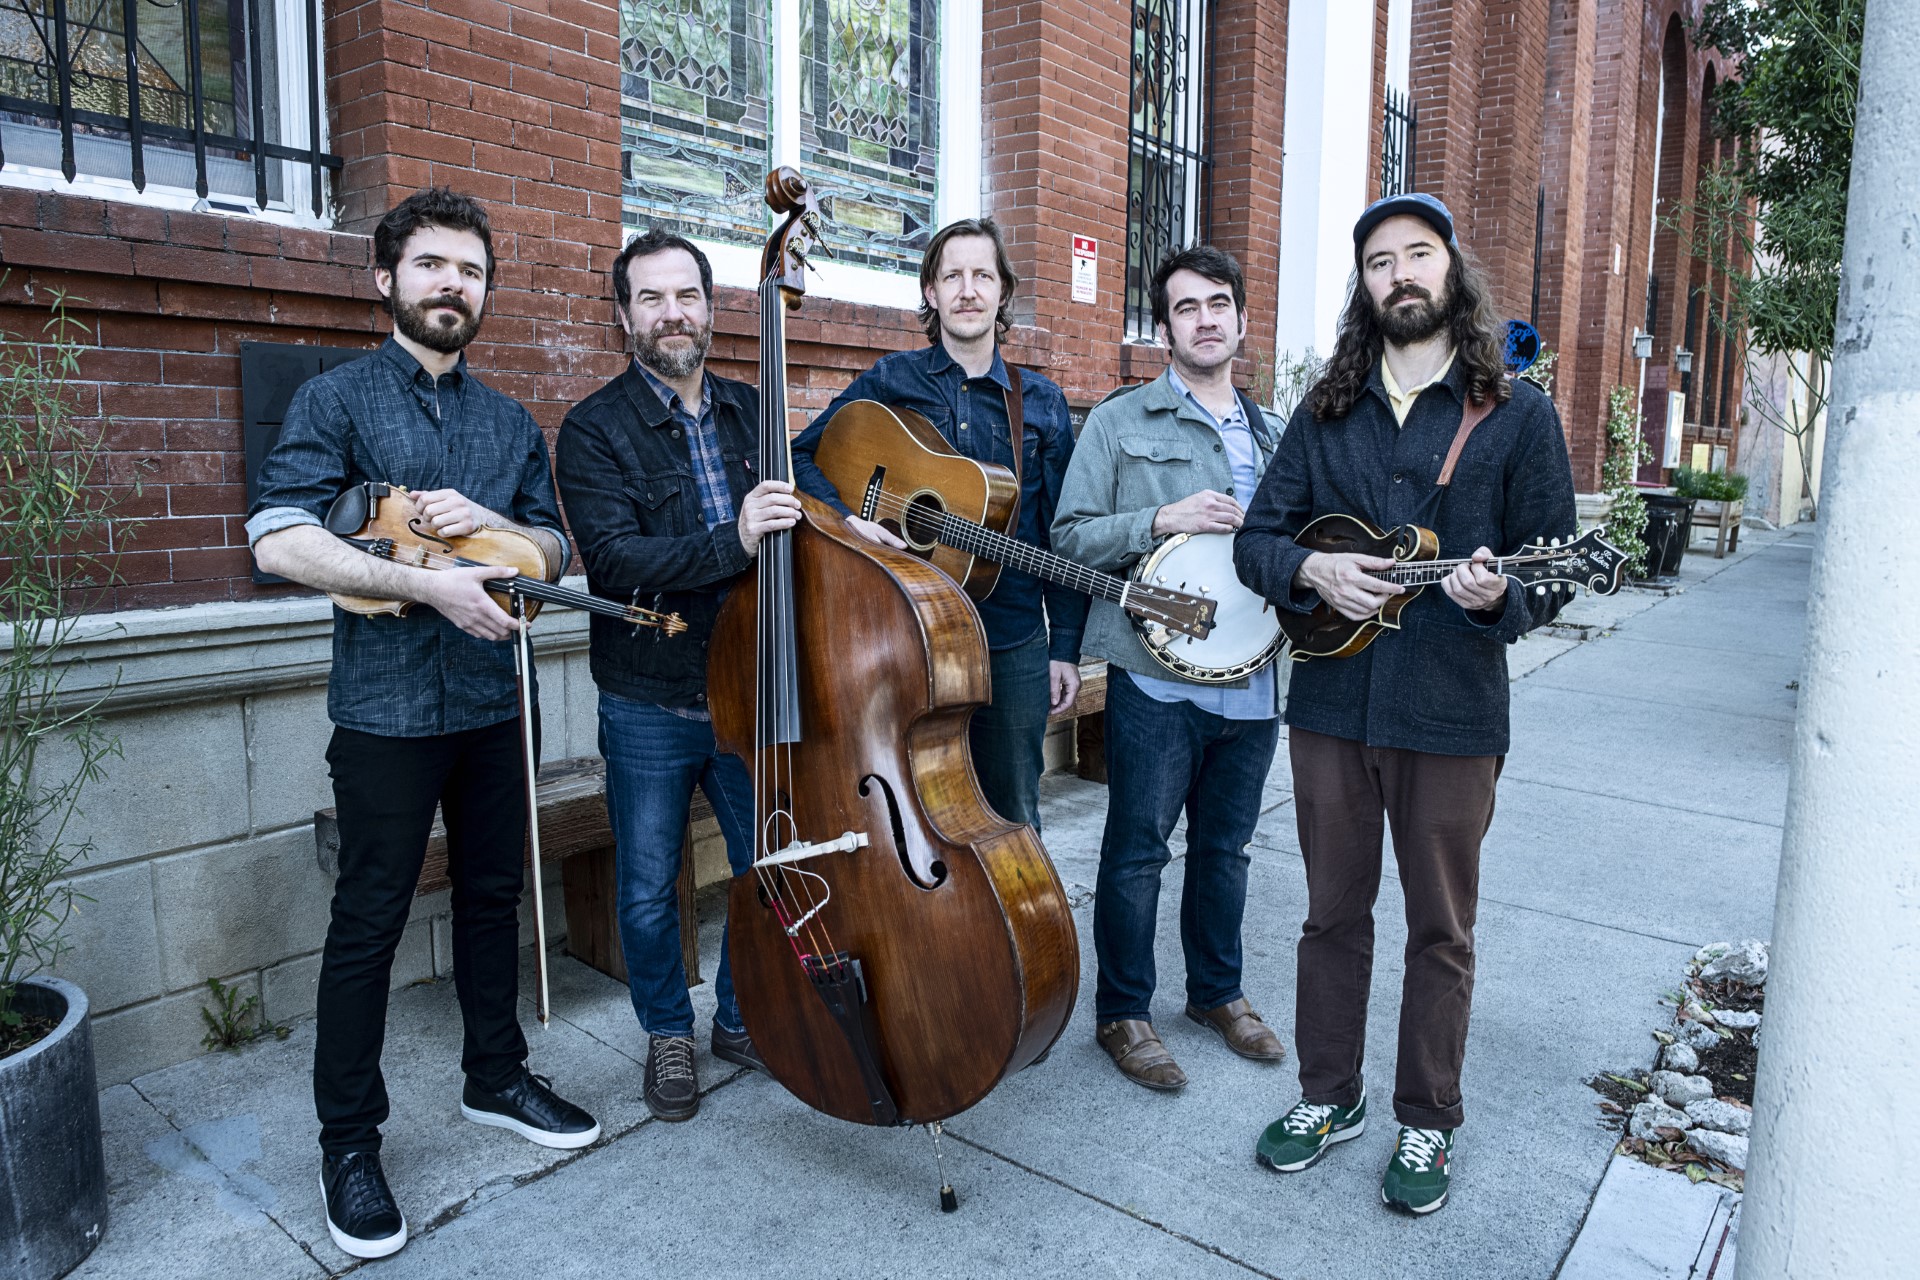 Five members of the bluegrass band Mighty Poplar